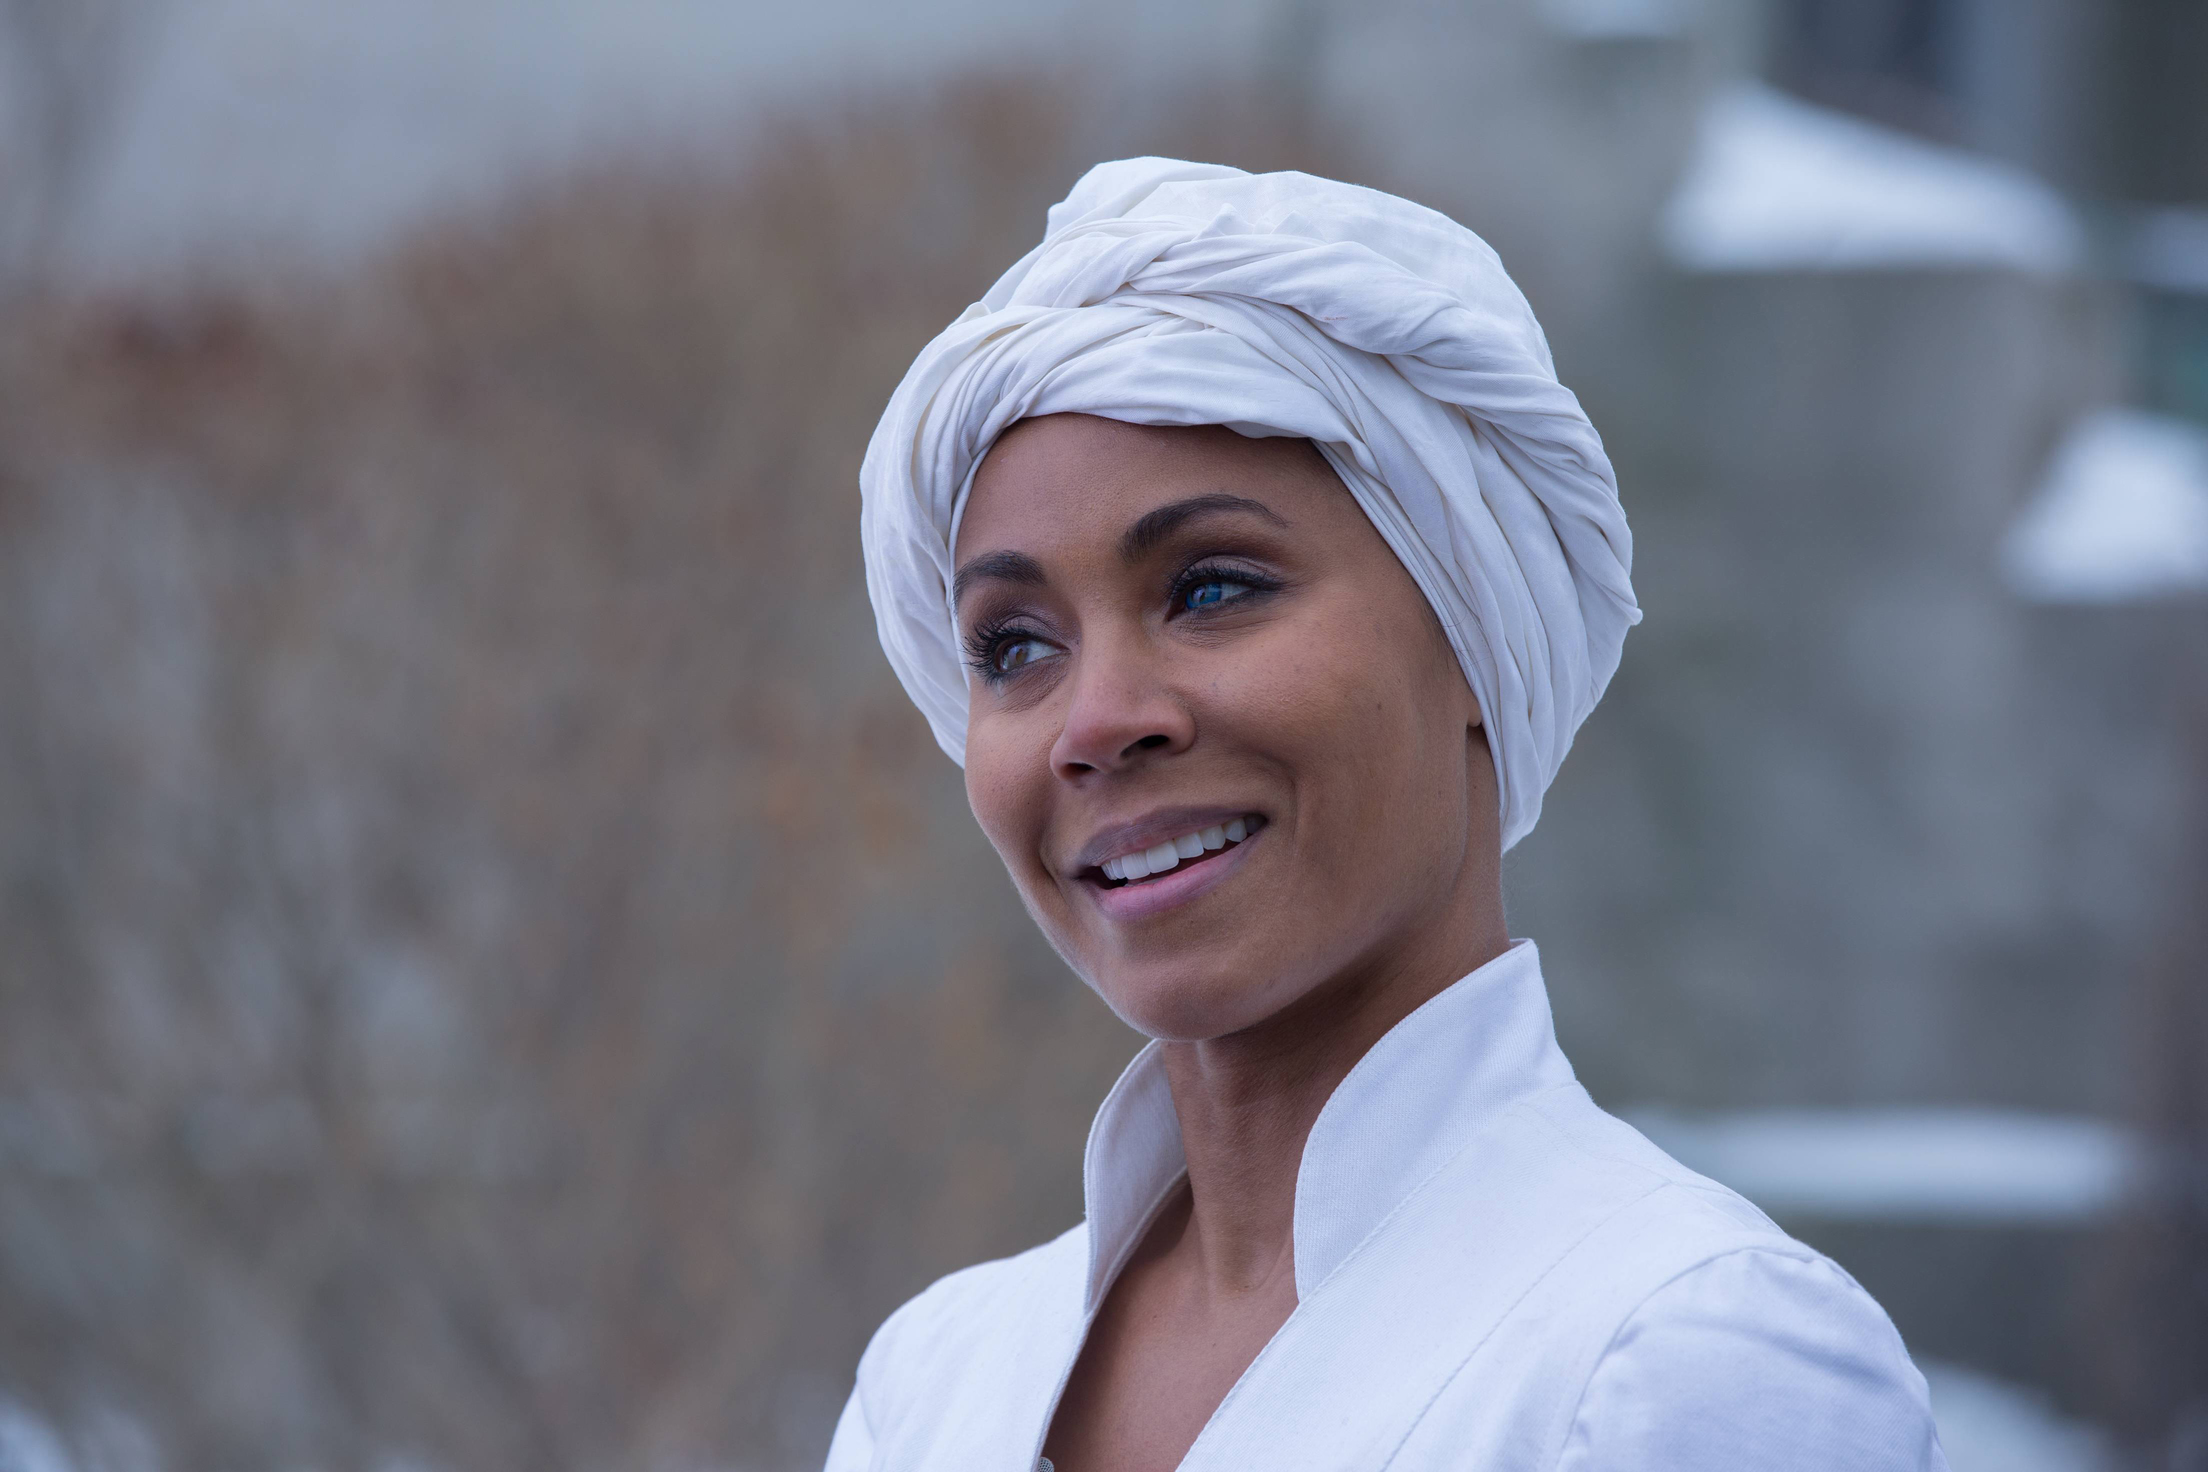 GOTHAM: Fish Mooney (Jada Pinkett Smith), smiles after escaping the Dollmaker in the âBeasts of Preyâ episode of GOTHAM airing Monday, April 13 (8:00-9:00 PM ET/PT) on FOX.  Â©2015 Fox Broadcasting Co. Cr: Jessica Miglio/FOX